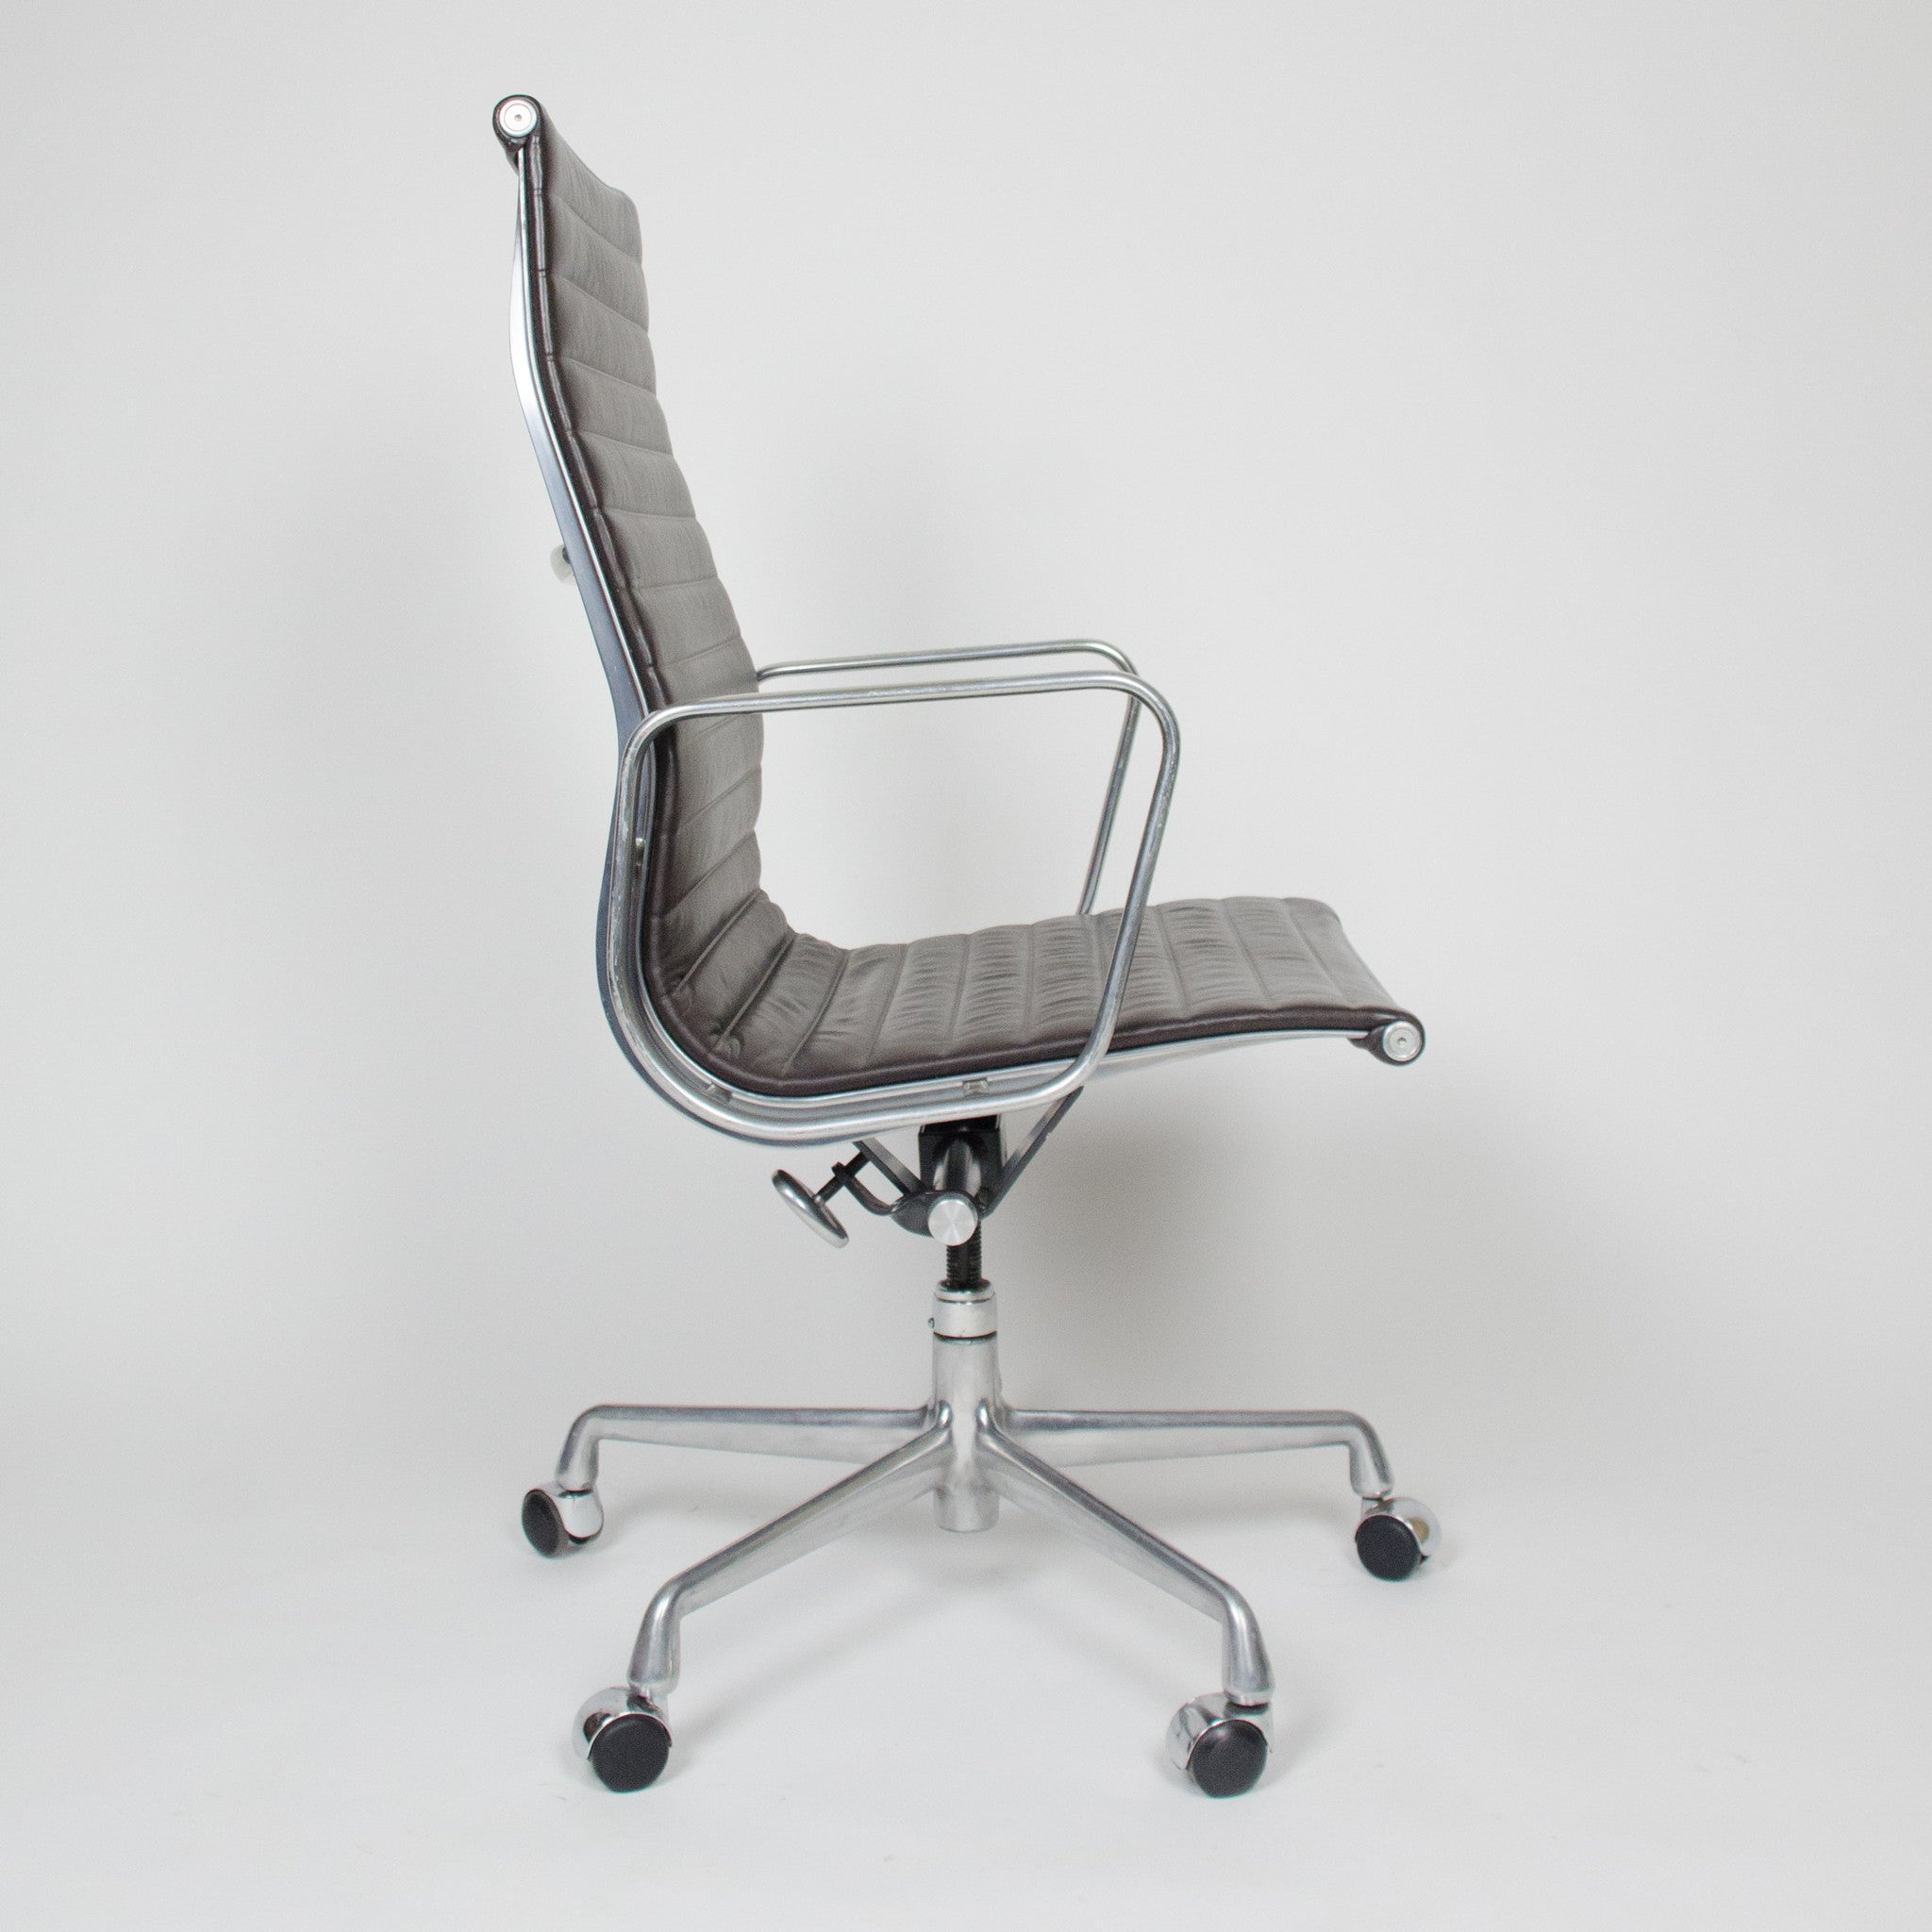 SOLD Eames Herman Miller Leather High Executive Aluminum Group Desk Chairs (5x available)